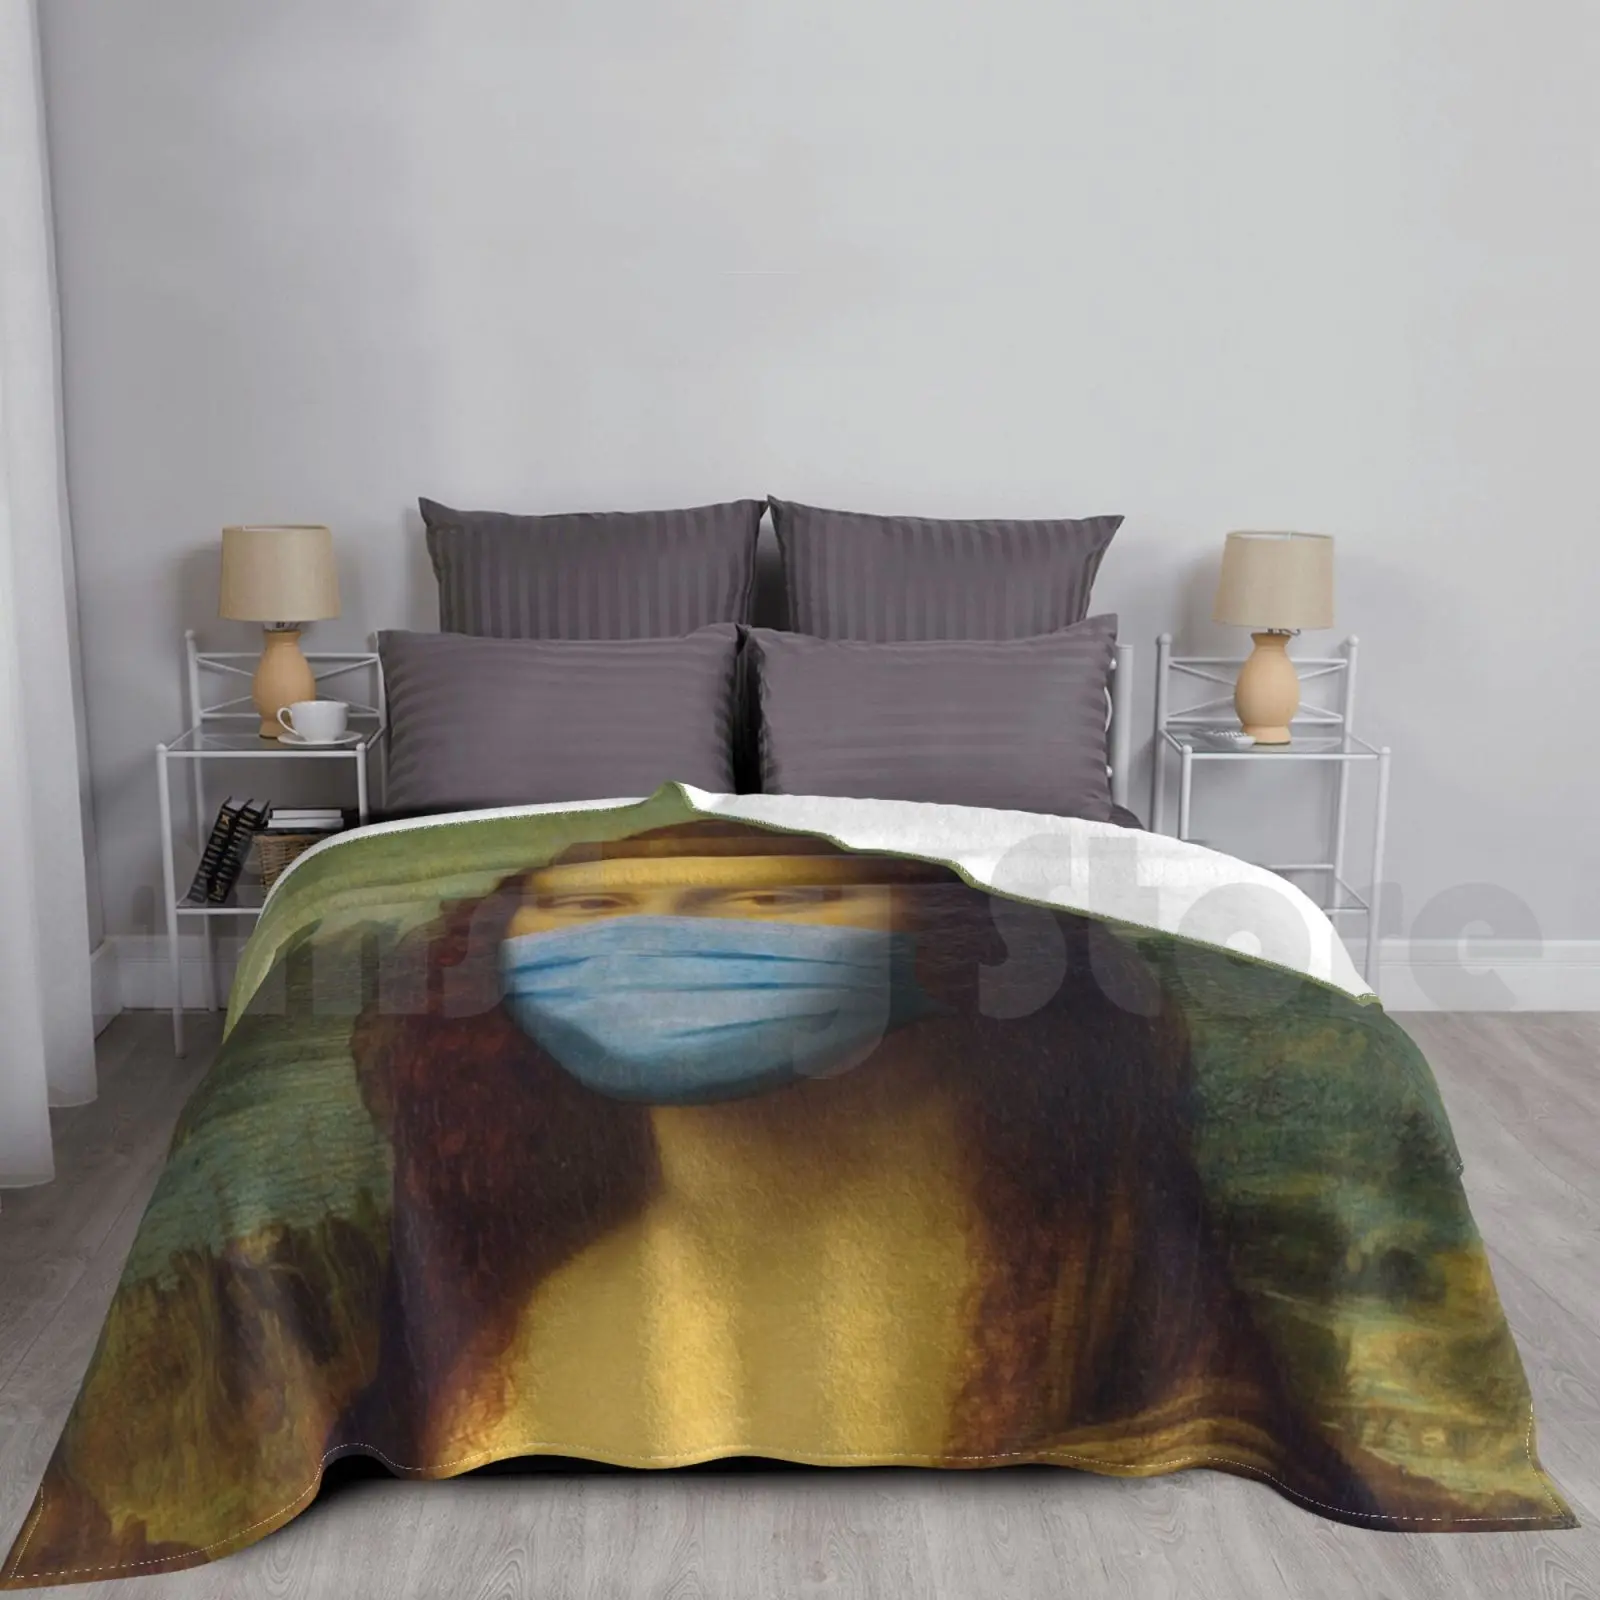 2021 Mona Lisa Blanket Super Soft Warm Light Thin Toilet Paper Quarantine Social Distancing Home Stay At Home Mona